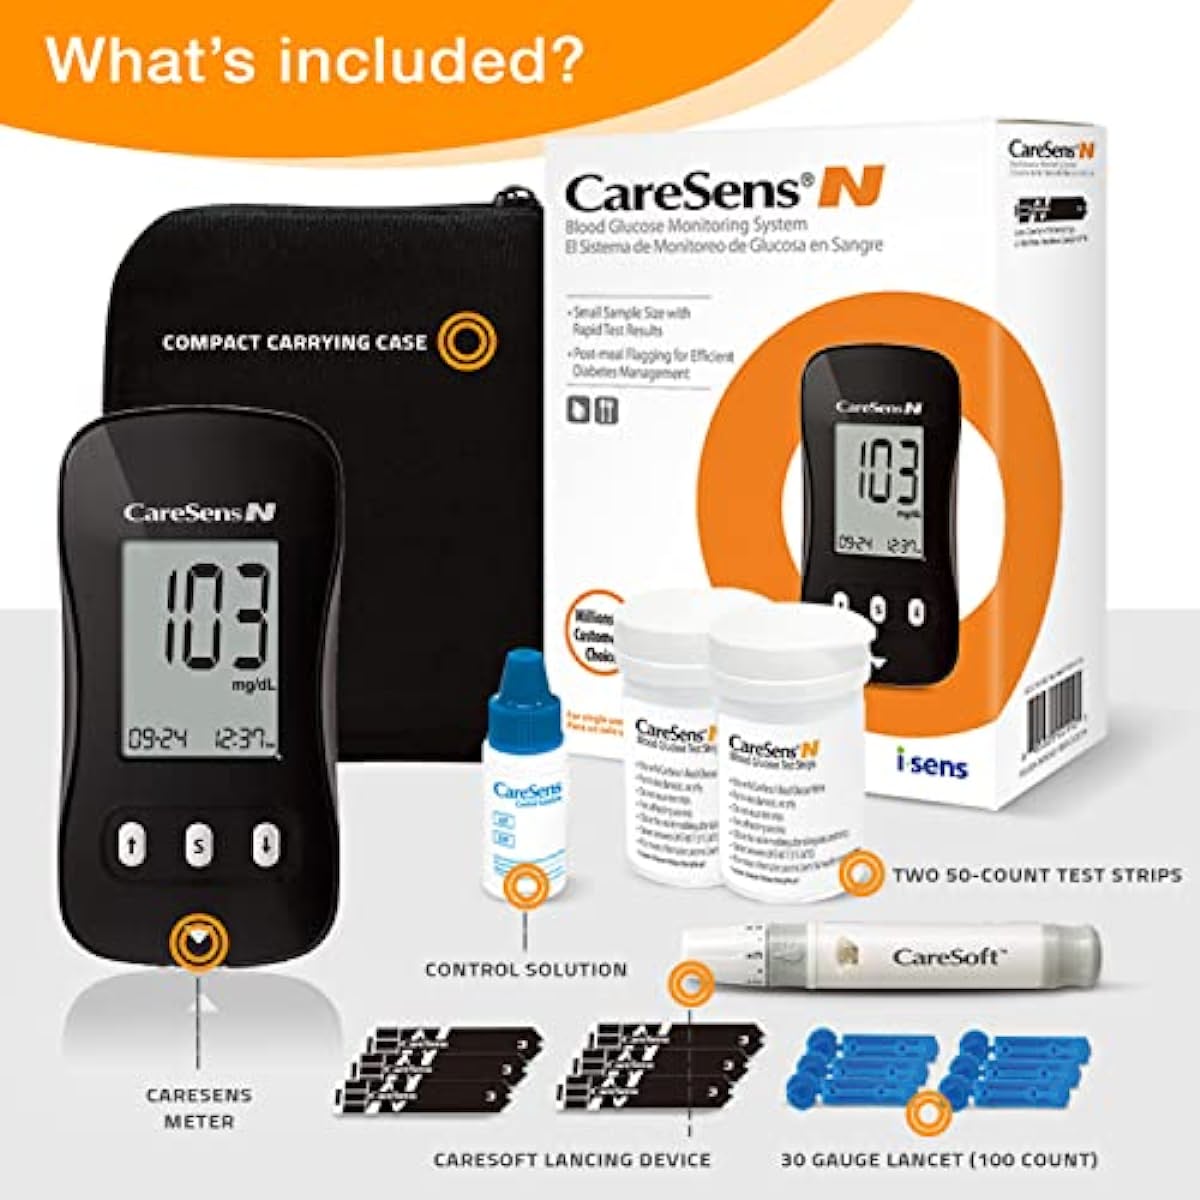 CareSens N Blood Glucose Monitor Kit with 100 Blood Sugar Test Strips, 100 Lancets, 1 Blood Glucose Meter, 1 Lancing Device, Travel Case for Diabetes Testing Kit (Auto-Coding Glucometer kit with 1 Control Solution)